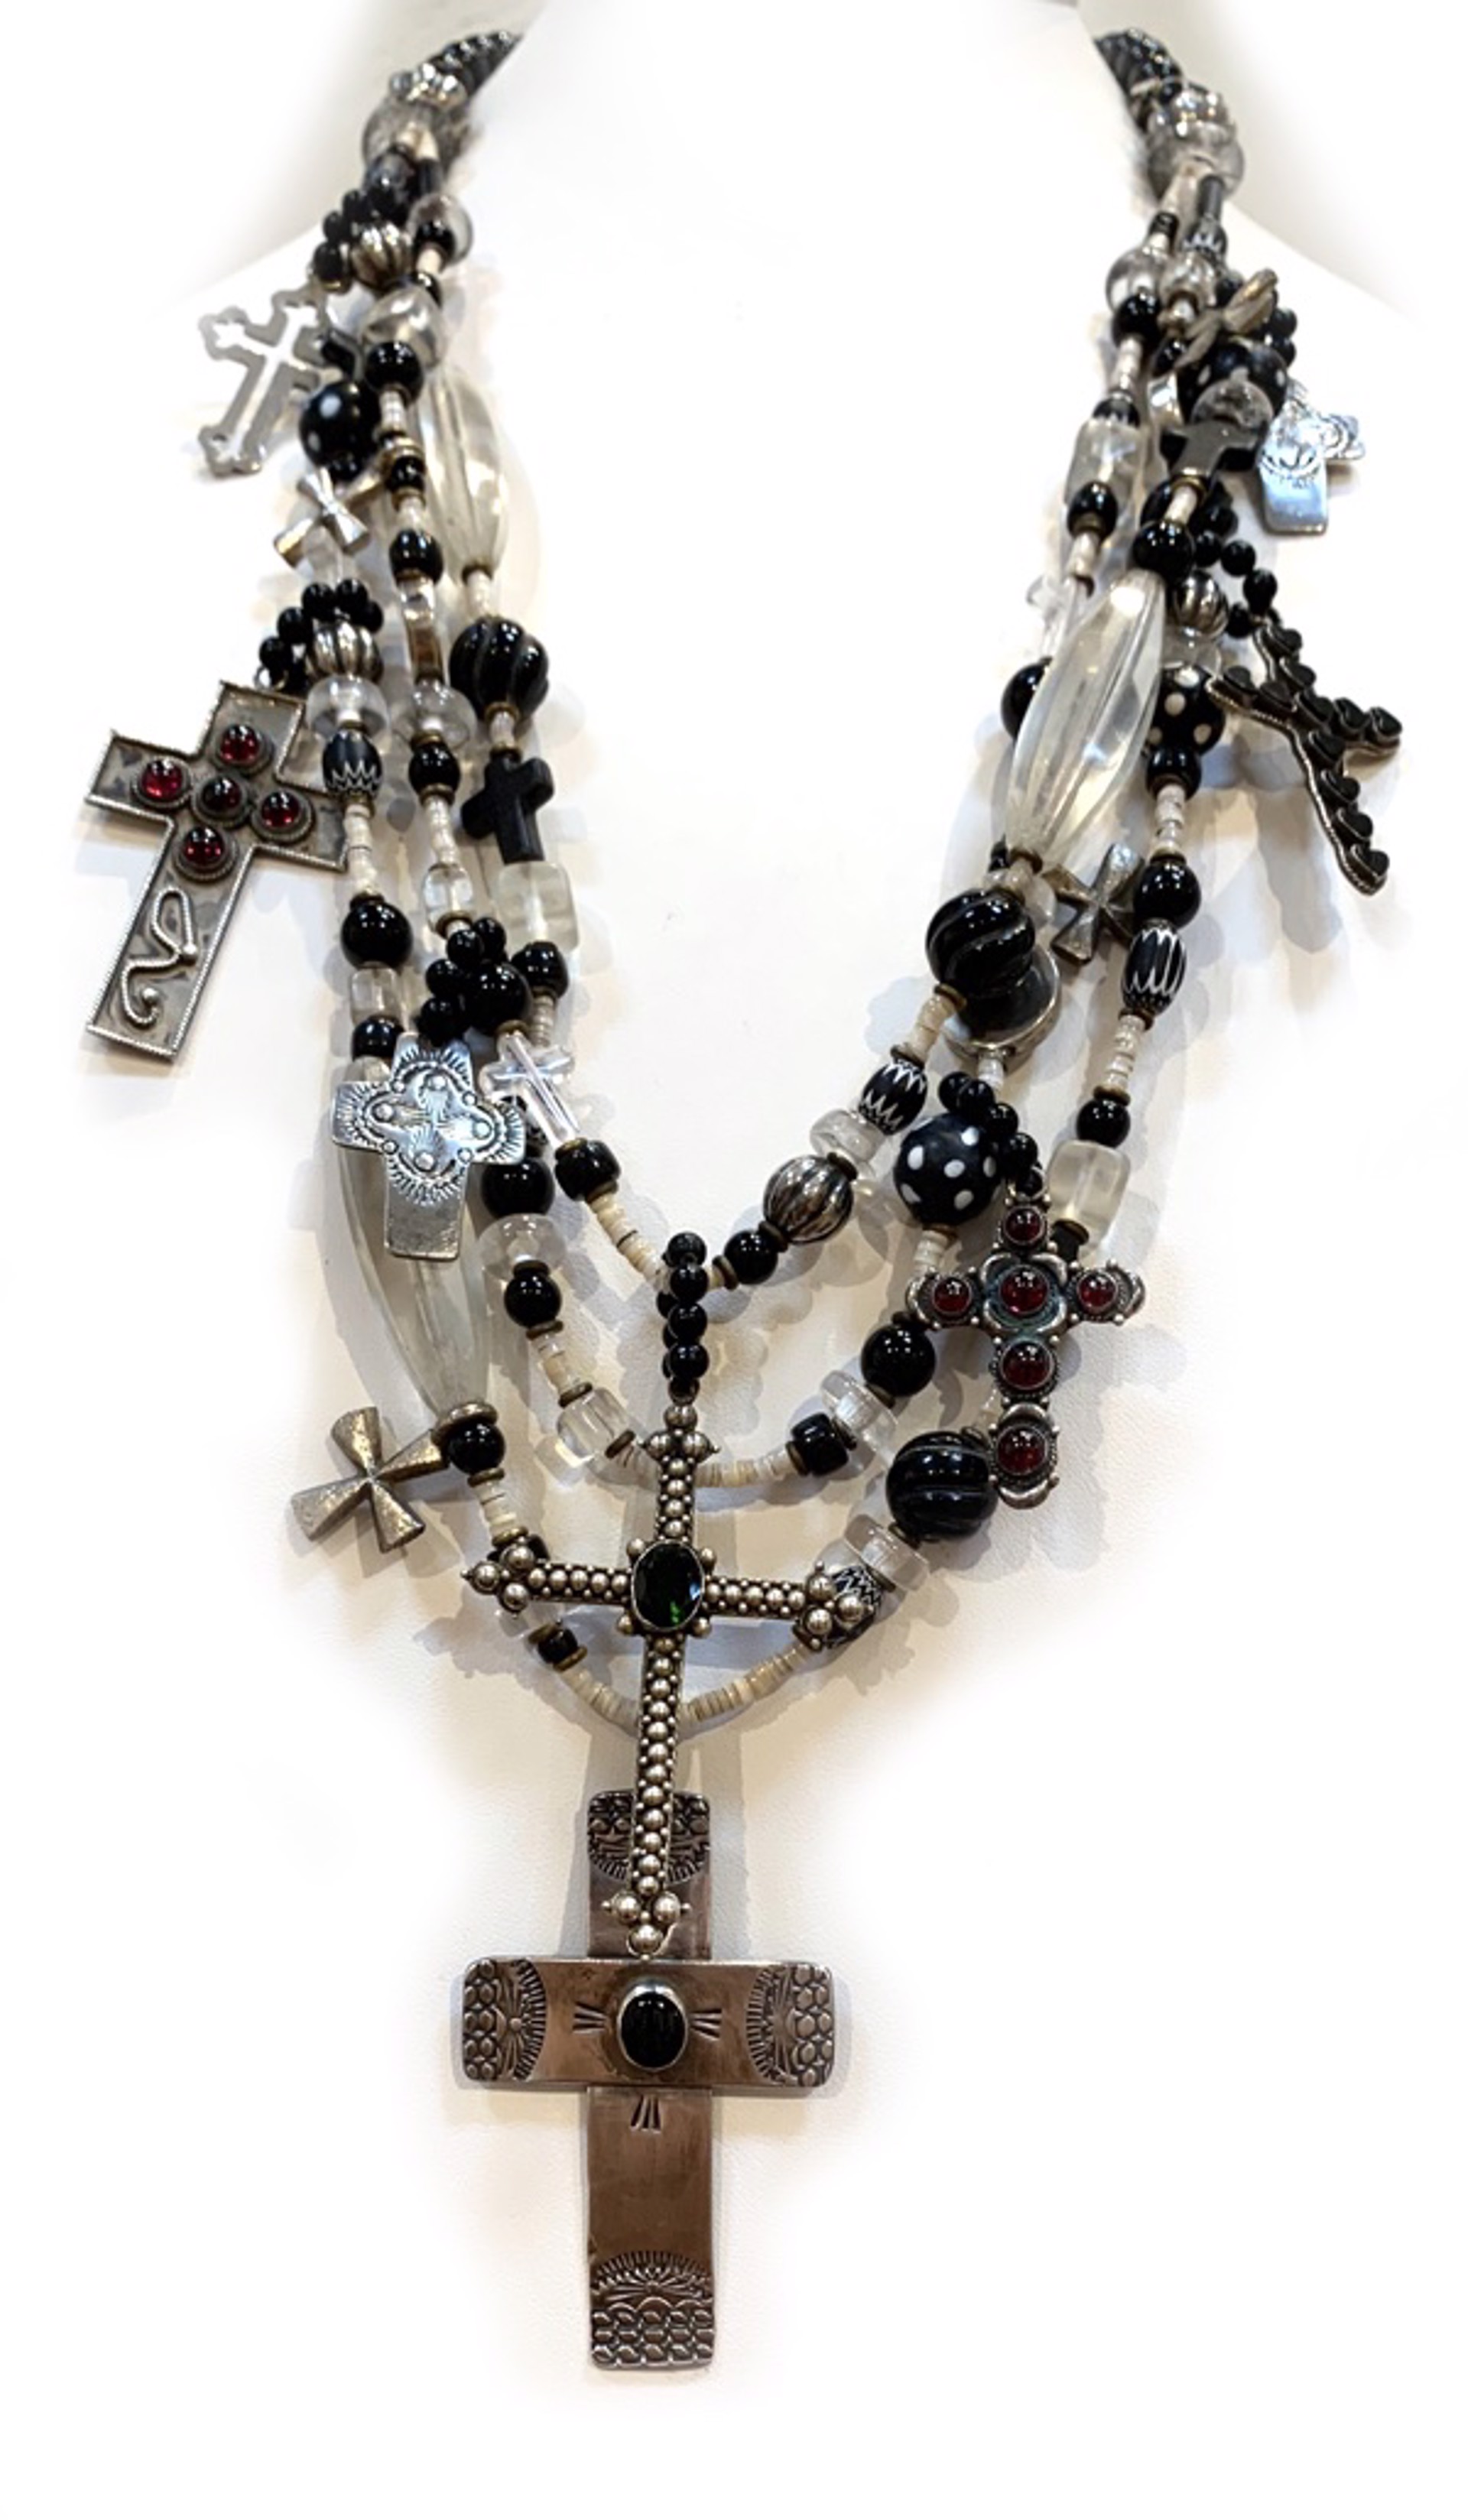 PP2 - 3 strand necklace w black onyx, african trade beads, Sterling and oyster shell by Kim Yubeta